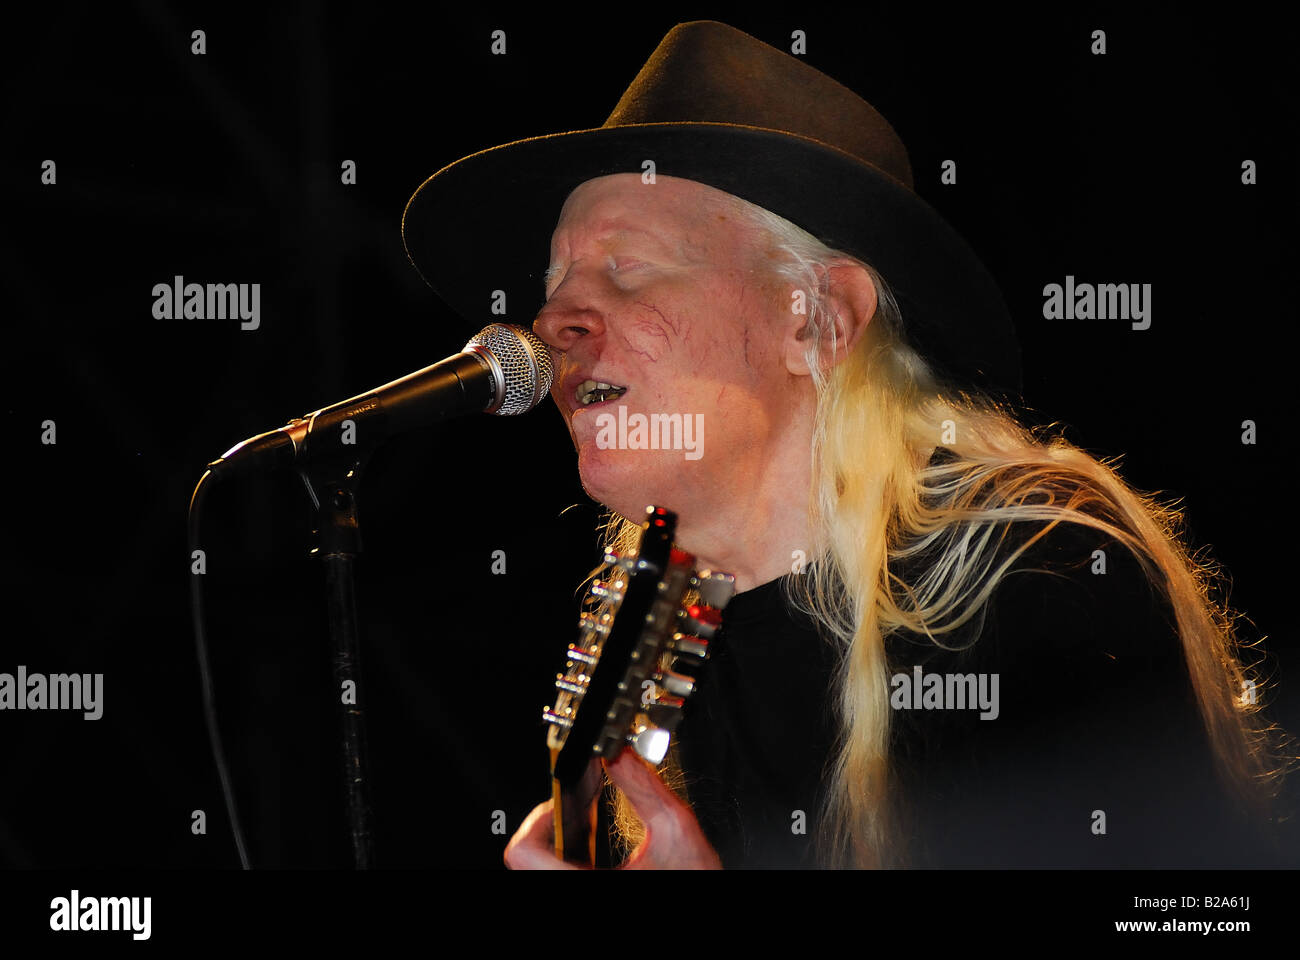 Johnny winter,the legend of the Texas blues Stock Photo